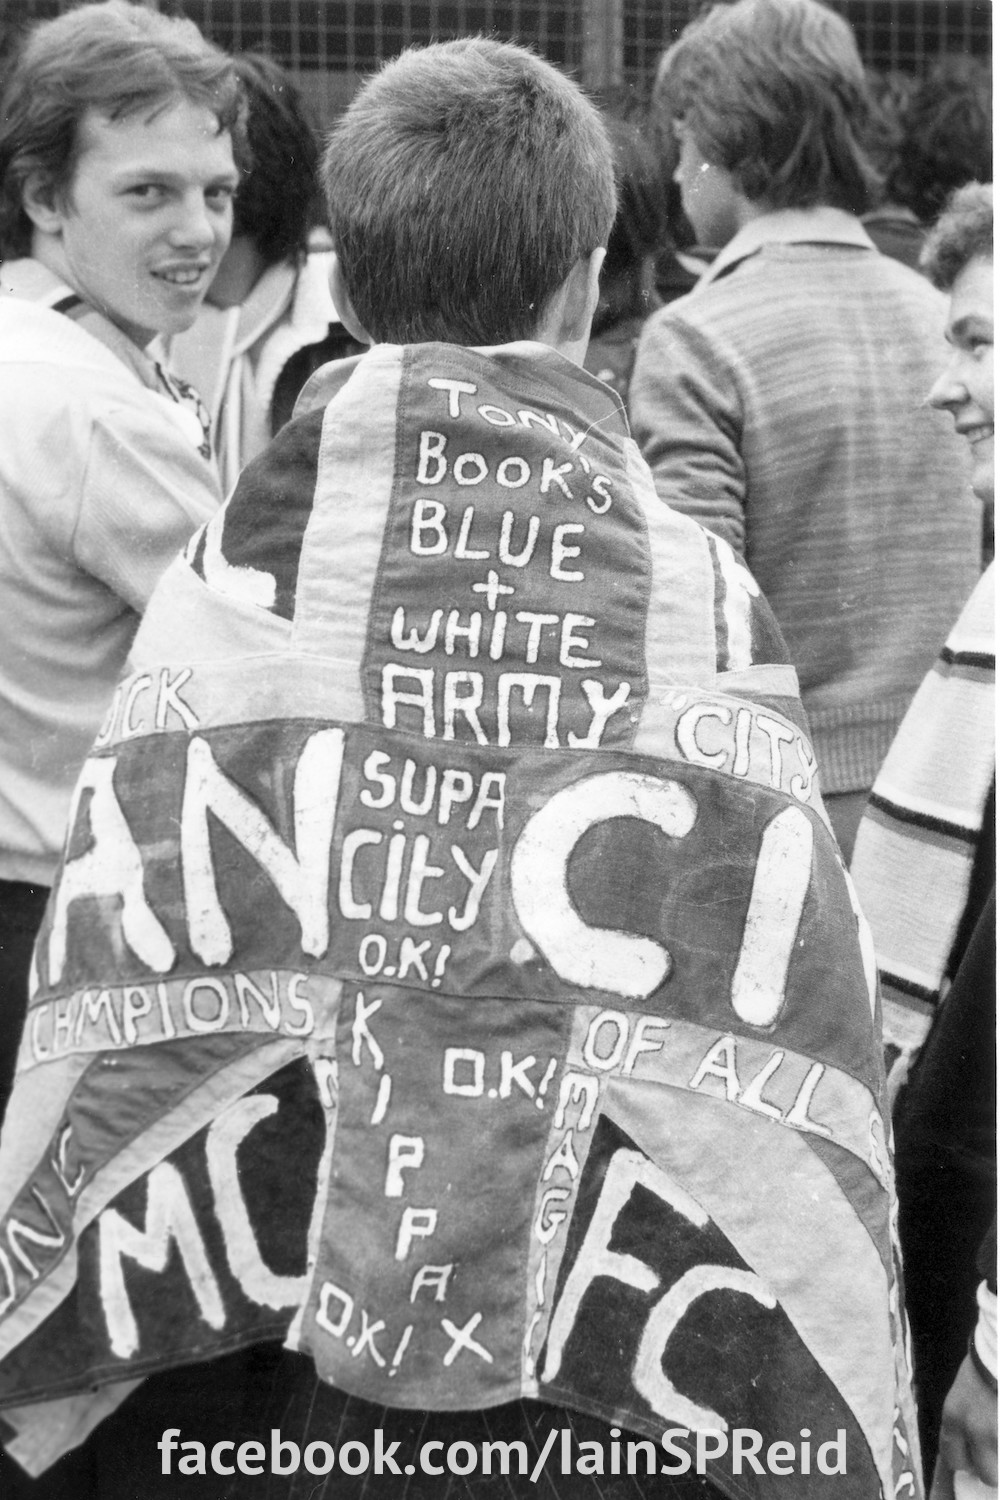 Manchester United and Manchester City football fans in the 1970s by Iaian S P reid 